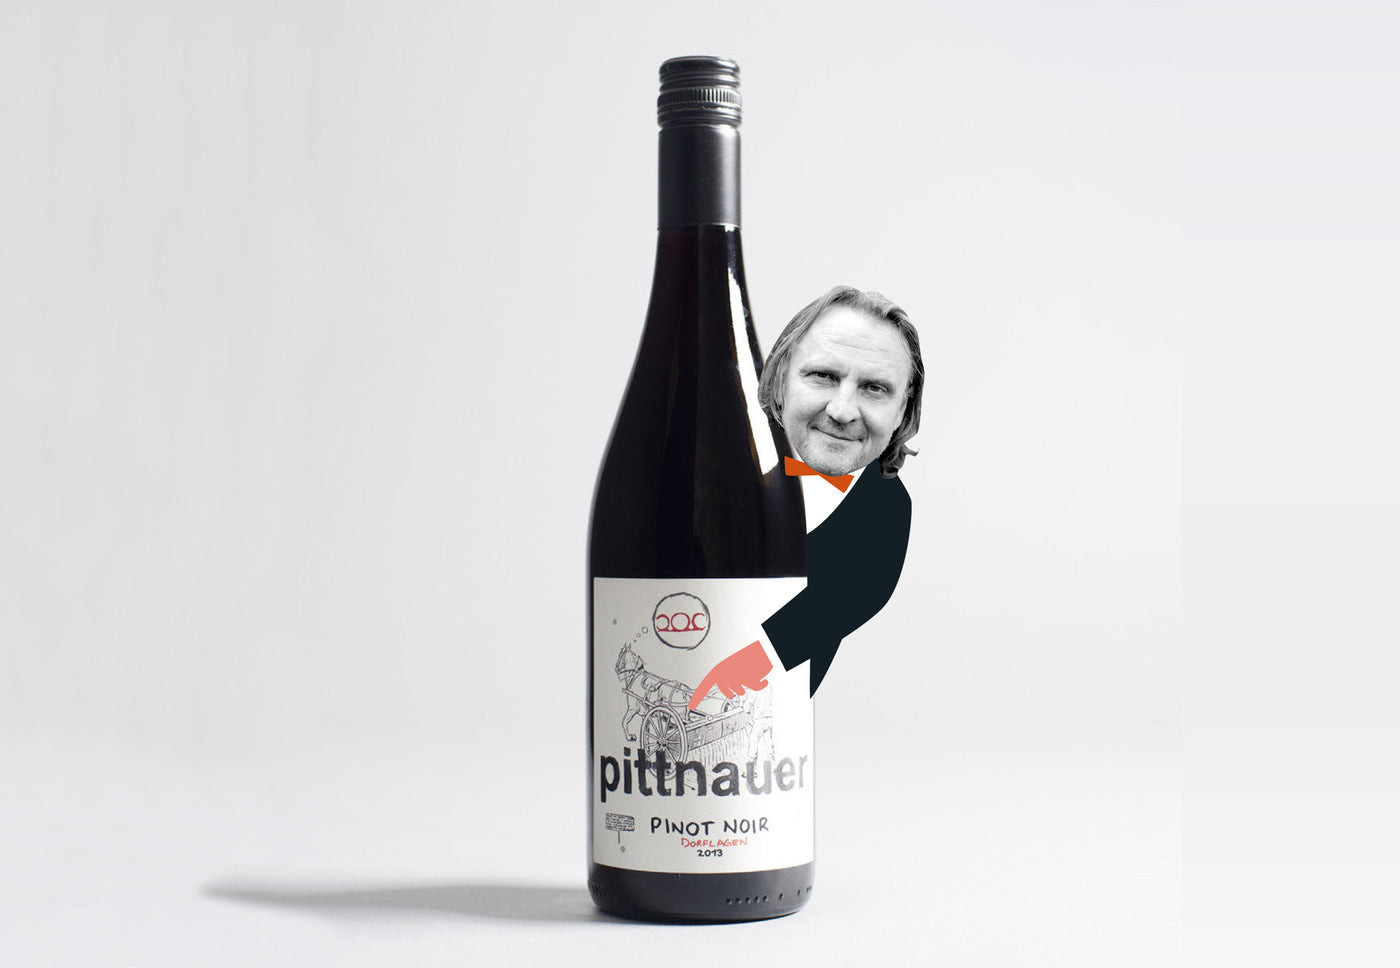 Behind the label: Pittnauer